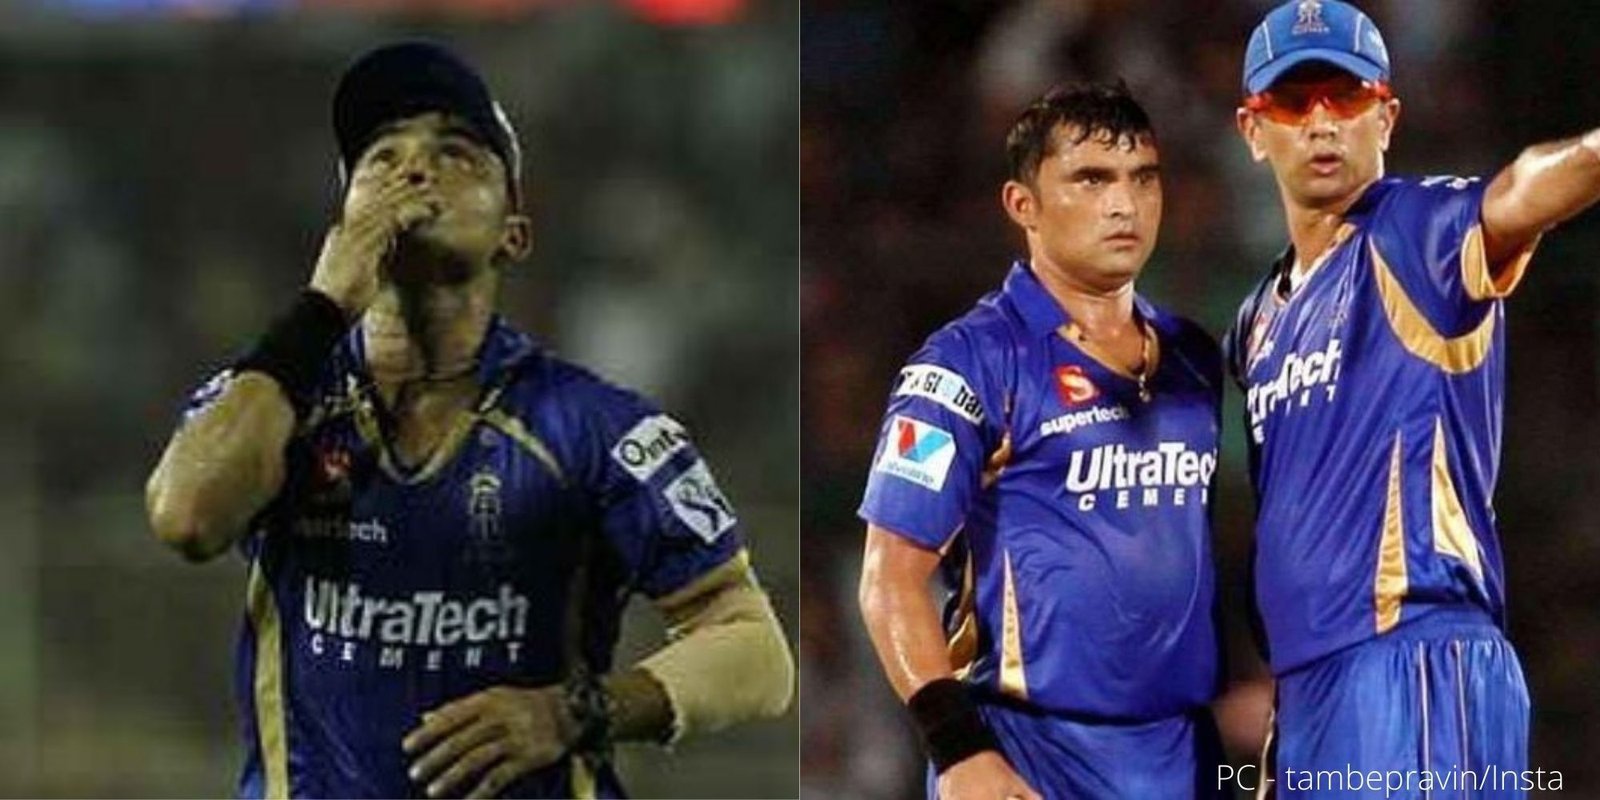 “Kaun Pravin Tambe” – The Cricketer Who Bowled Everyone Out At The Age Of 41